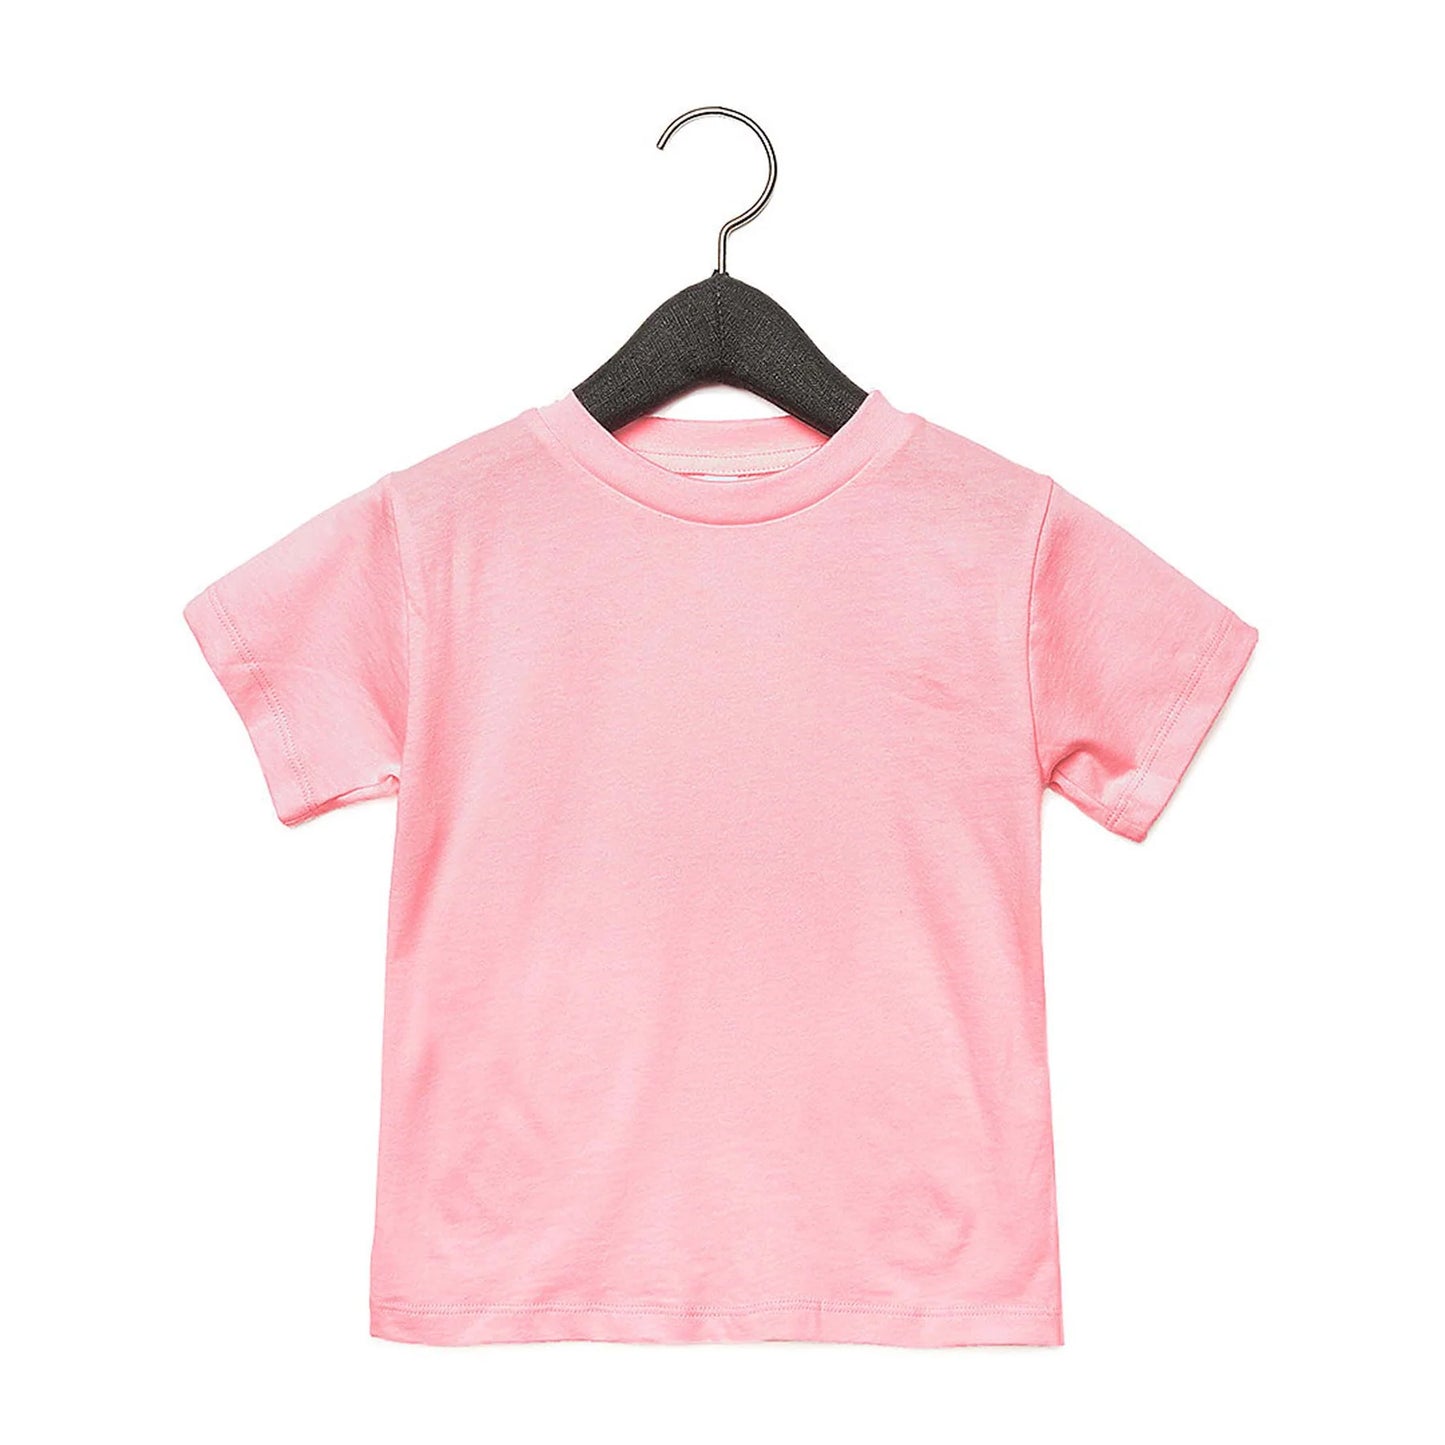 Blank Toddler Solid Color T-shirts for Unisex